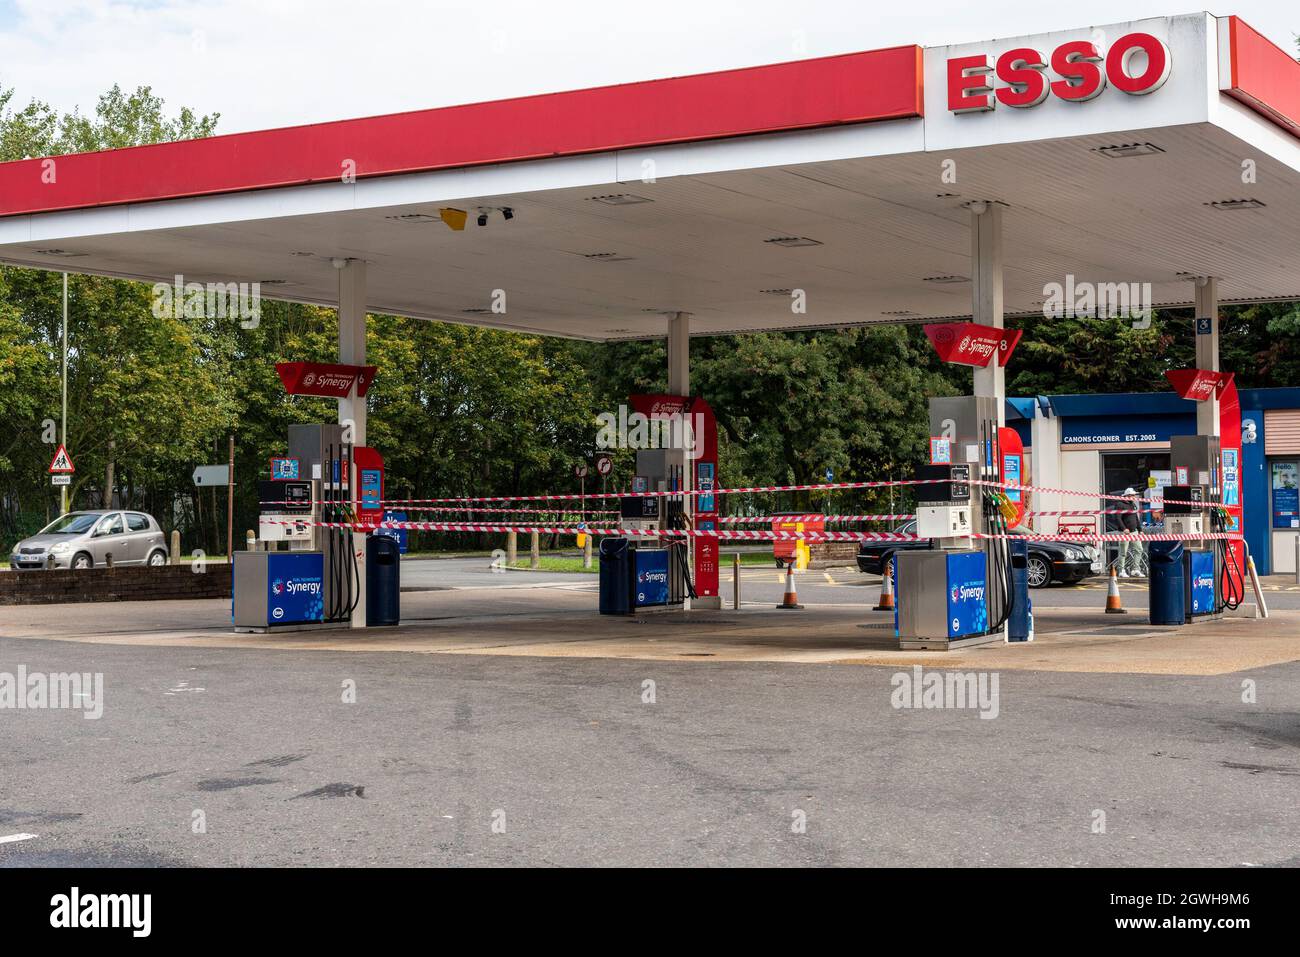 Edgware London UK, 3rd October 2021, Tesco Esso Pertrol Station, no fuel at pumps on forecourt due to fuel tank driver shortages and panic buying. Stock Photo